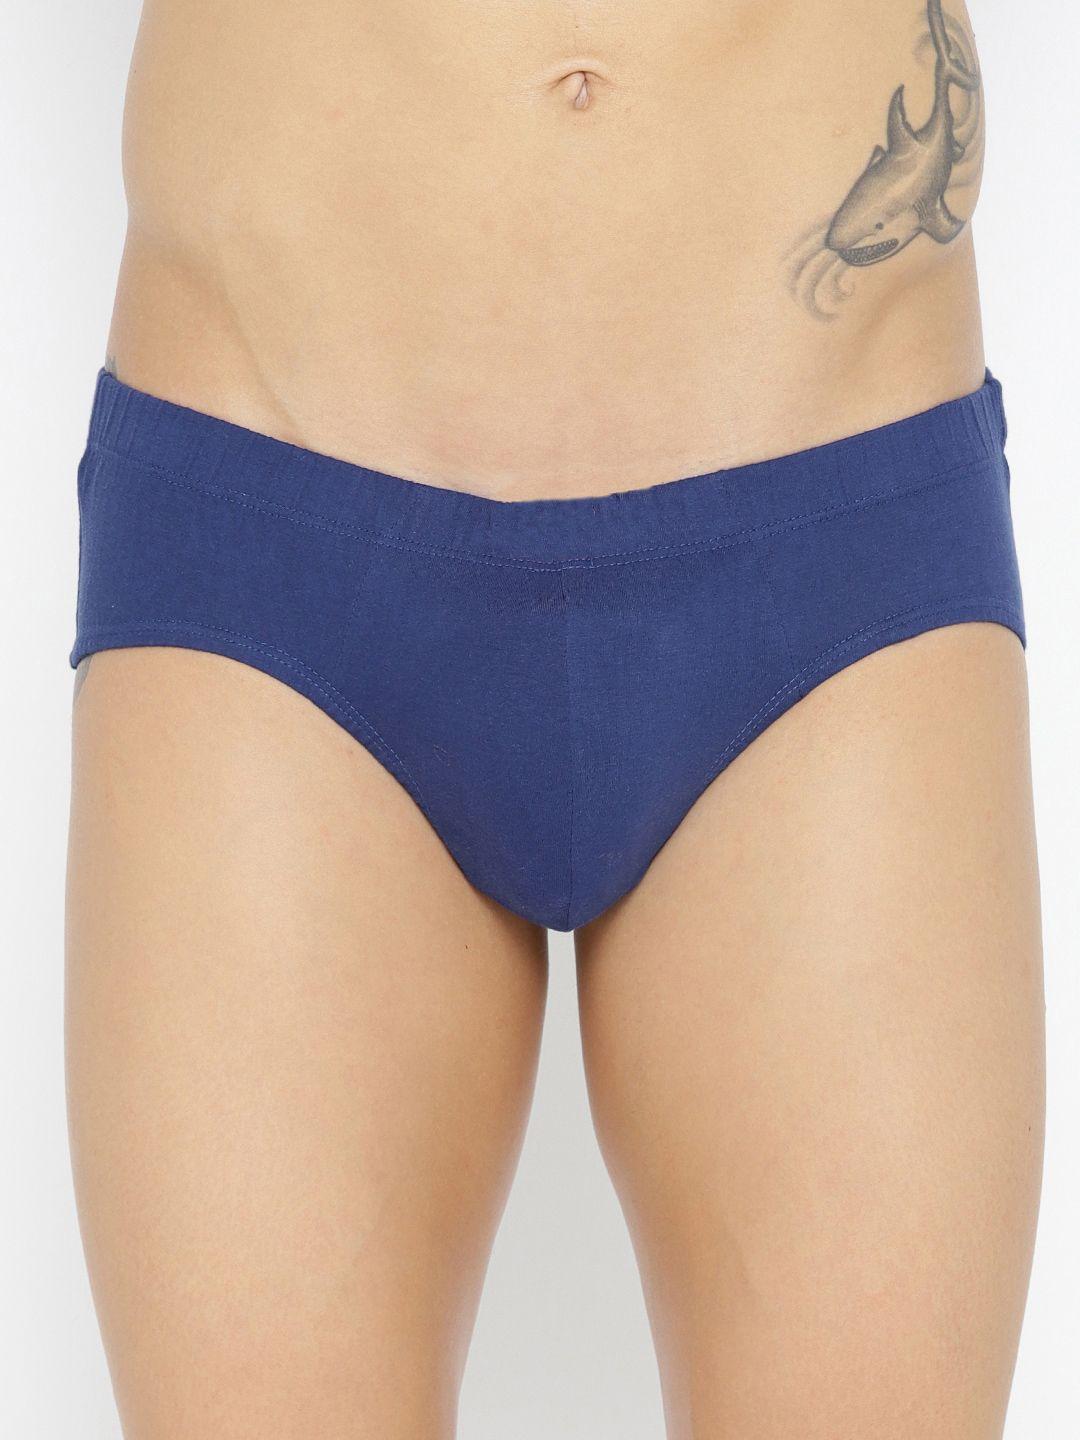 the roadster lifestyle co. blue mid-rise pure cotton basic briefs rbie-1003-bl-1